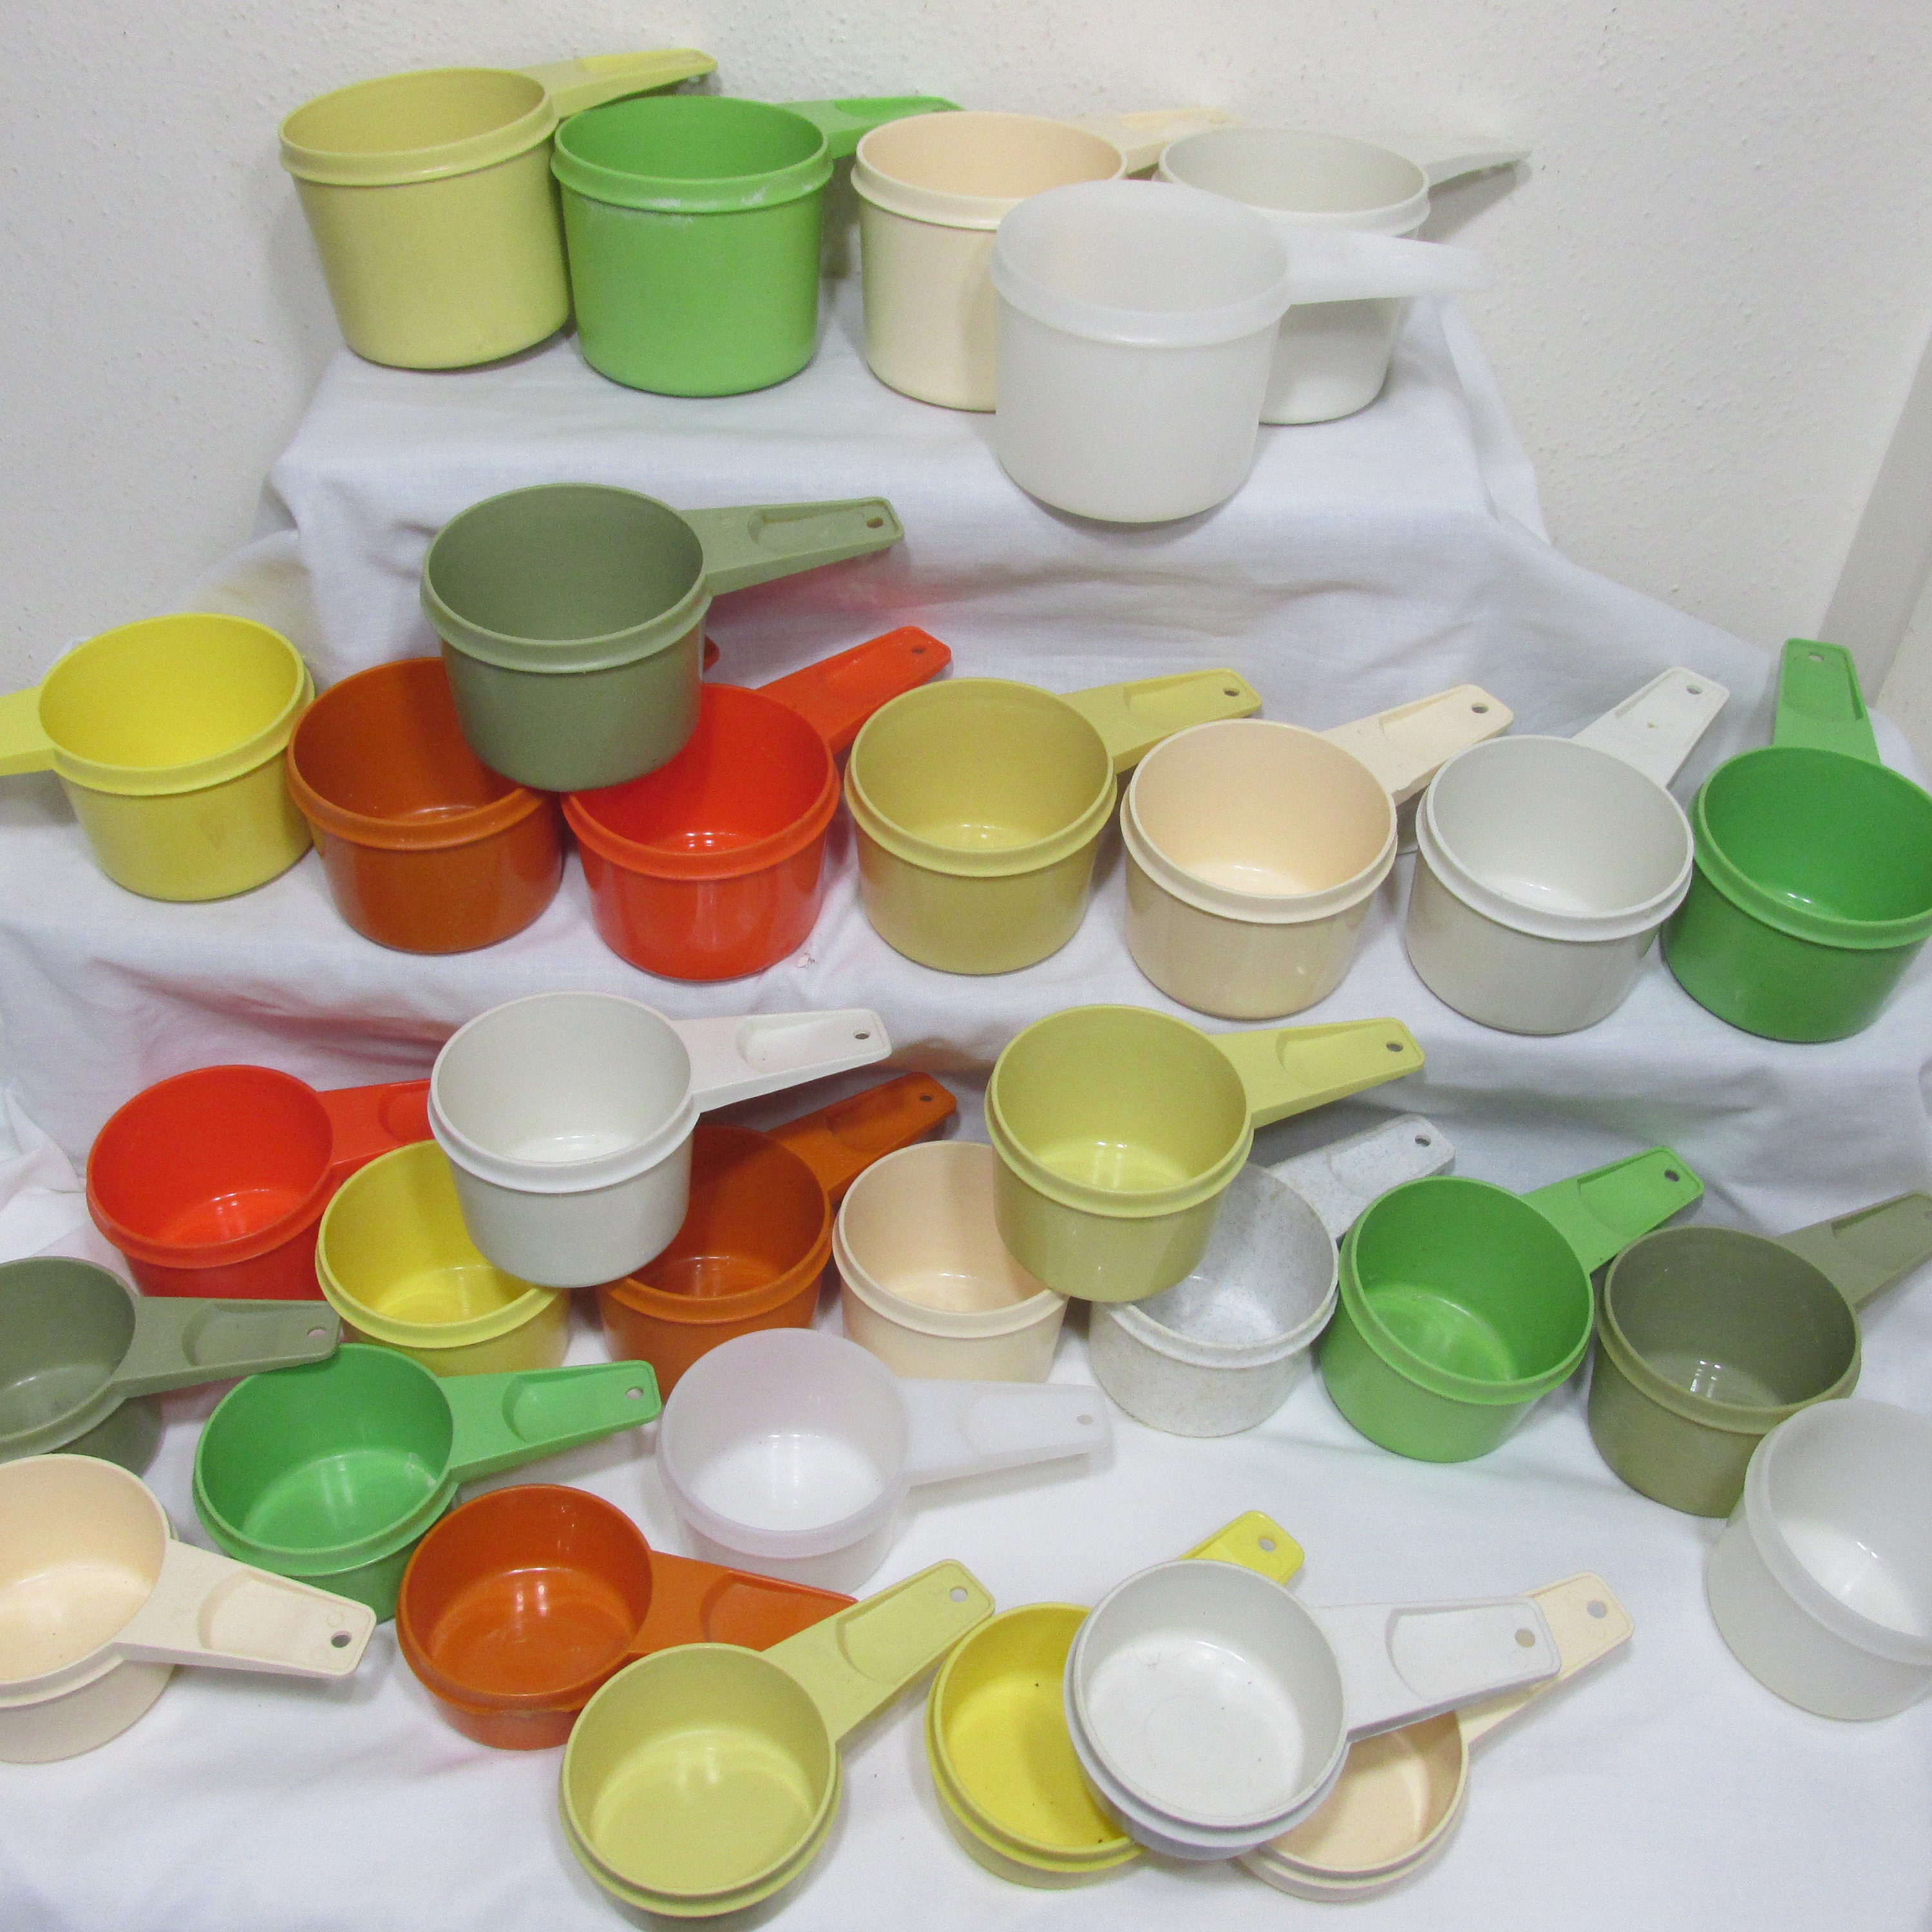 NEW Tupperware Measuring Cups Set of 6 GREEN Curved Embossed Handle Baking  Tools